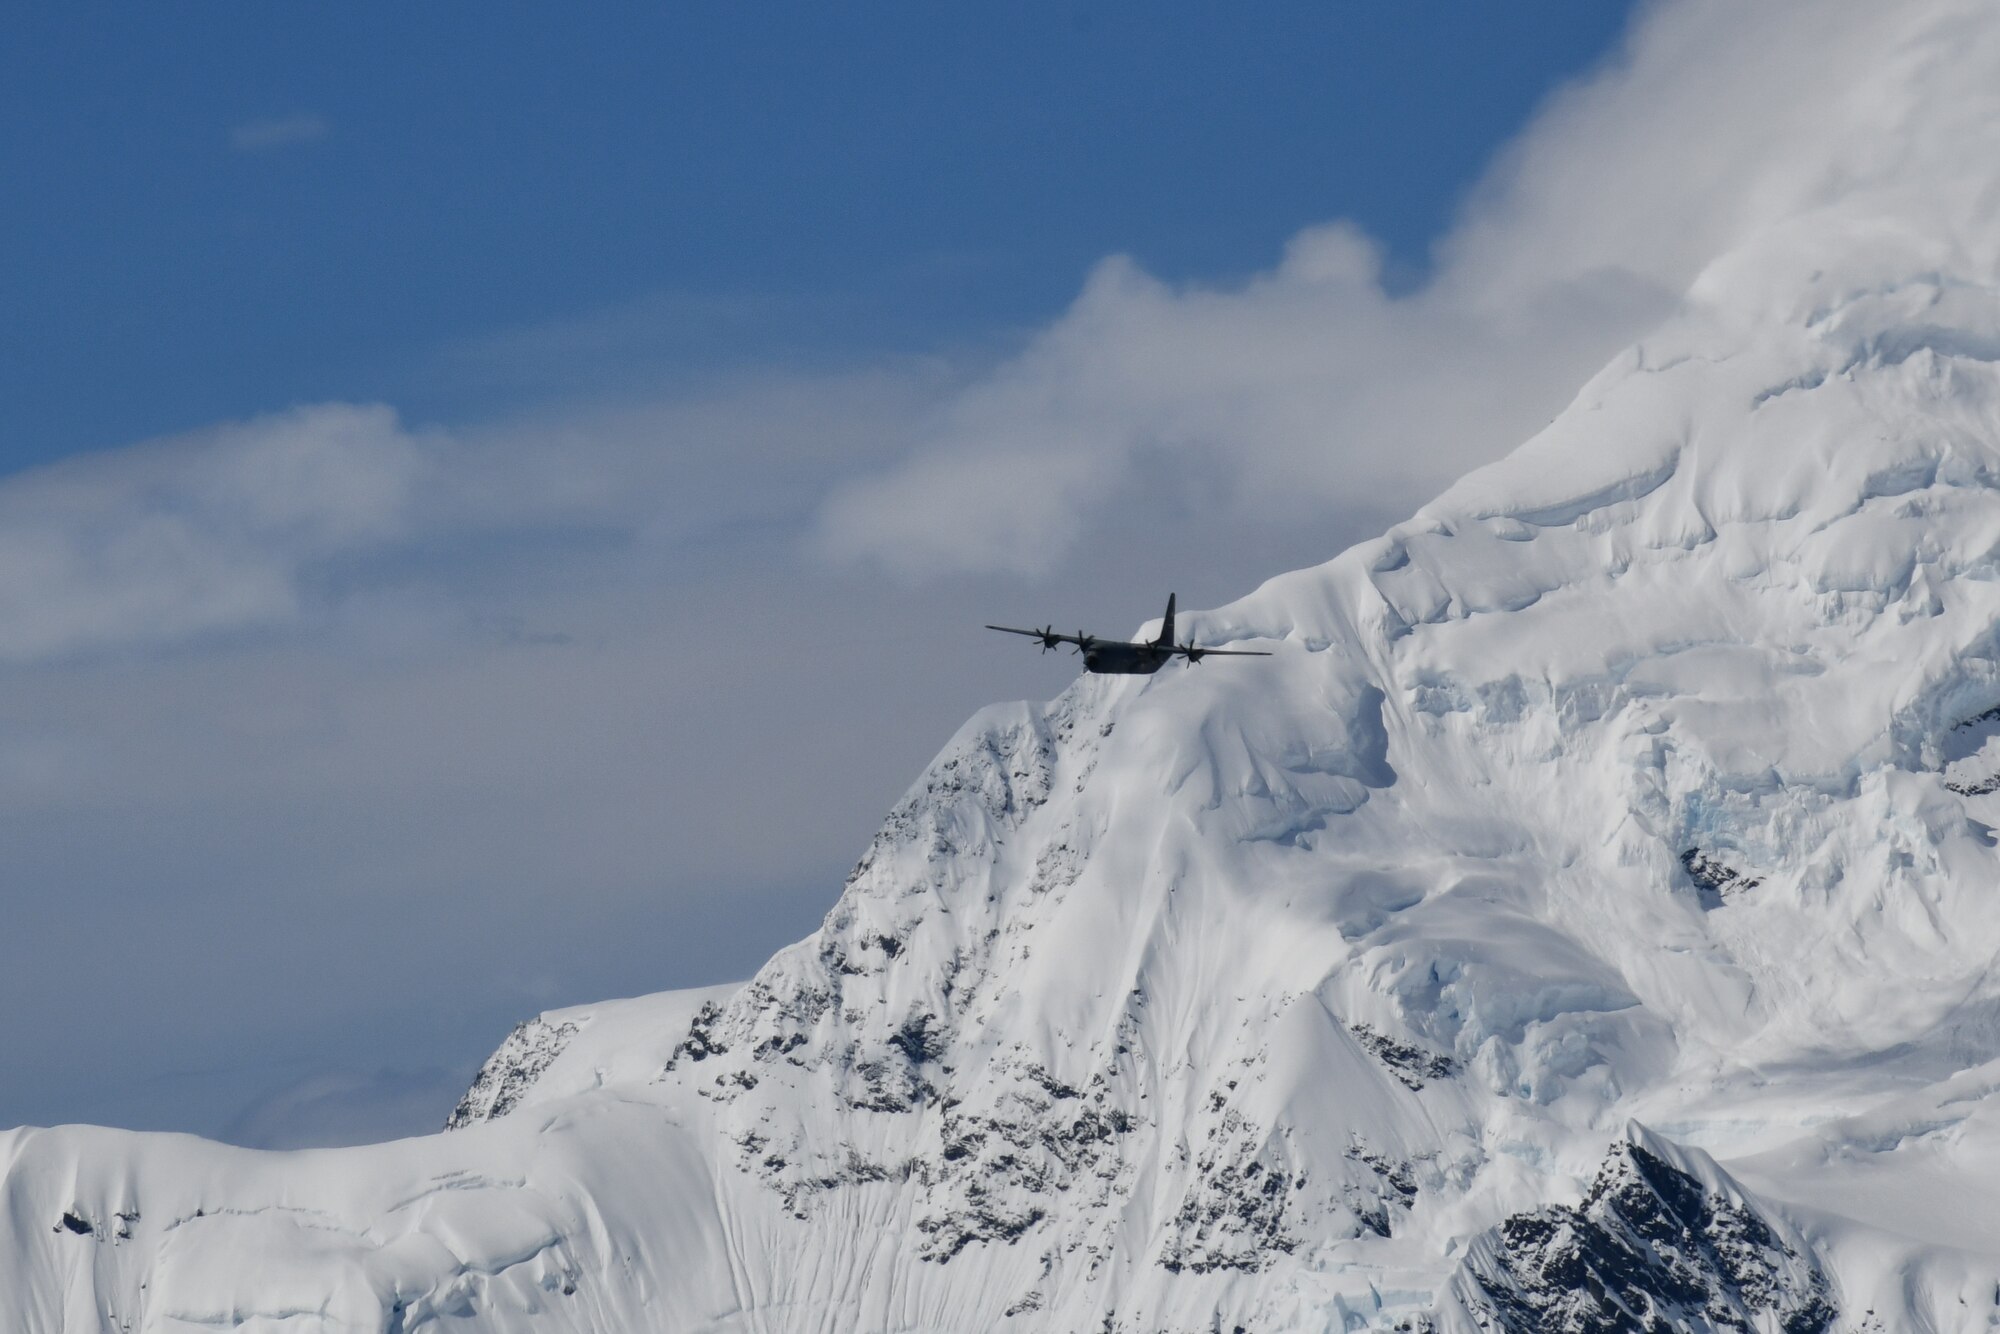 Pilots and loadmasters of the 815th Airlift Squadron conduct low-level tactical flight training patterns during a training exercise at Joint Base Elmendorf-Richardson, Alaska, July 13-16, 2021. The terrain of the mountain, valleys and along with the colder temperatures provided a different challenge for the low-level flights, which were an effective tactic in training for hostile environments.  (U.S. Air Force photo by Master Sgt. Jessica Kendziorek)